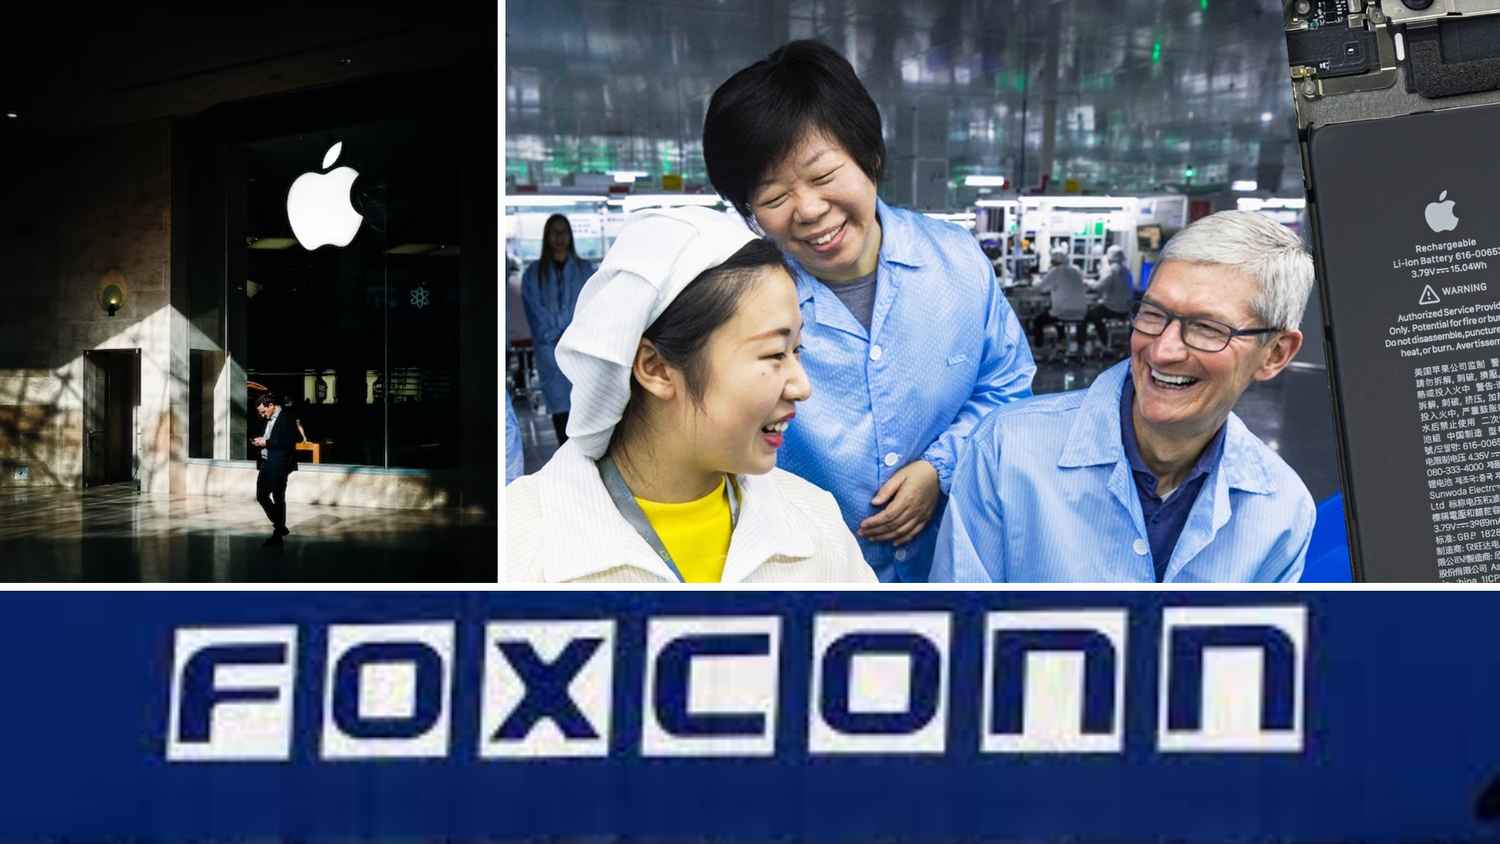 iPhone 16 Pro Max will be made in India, shockingly without Foxconn’s help